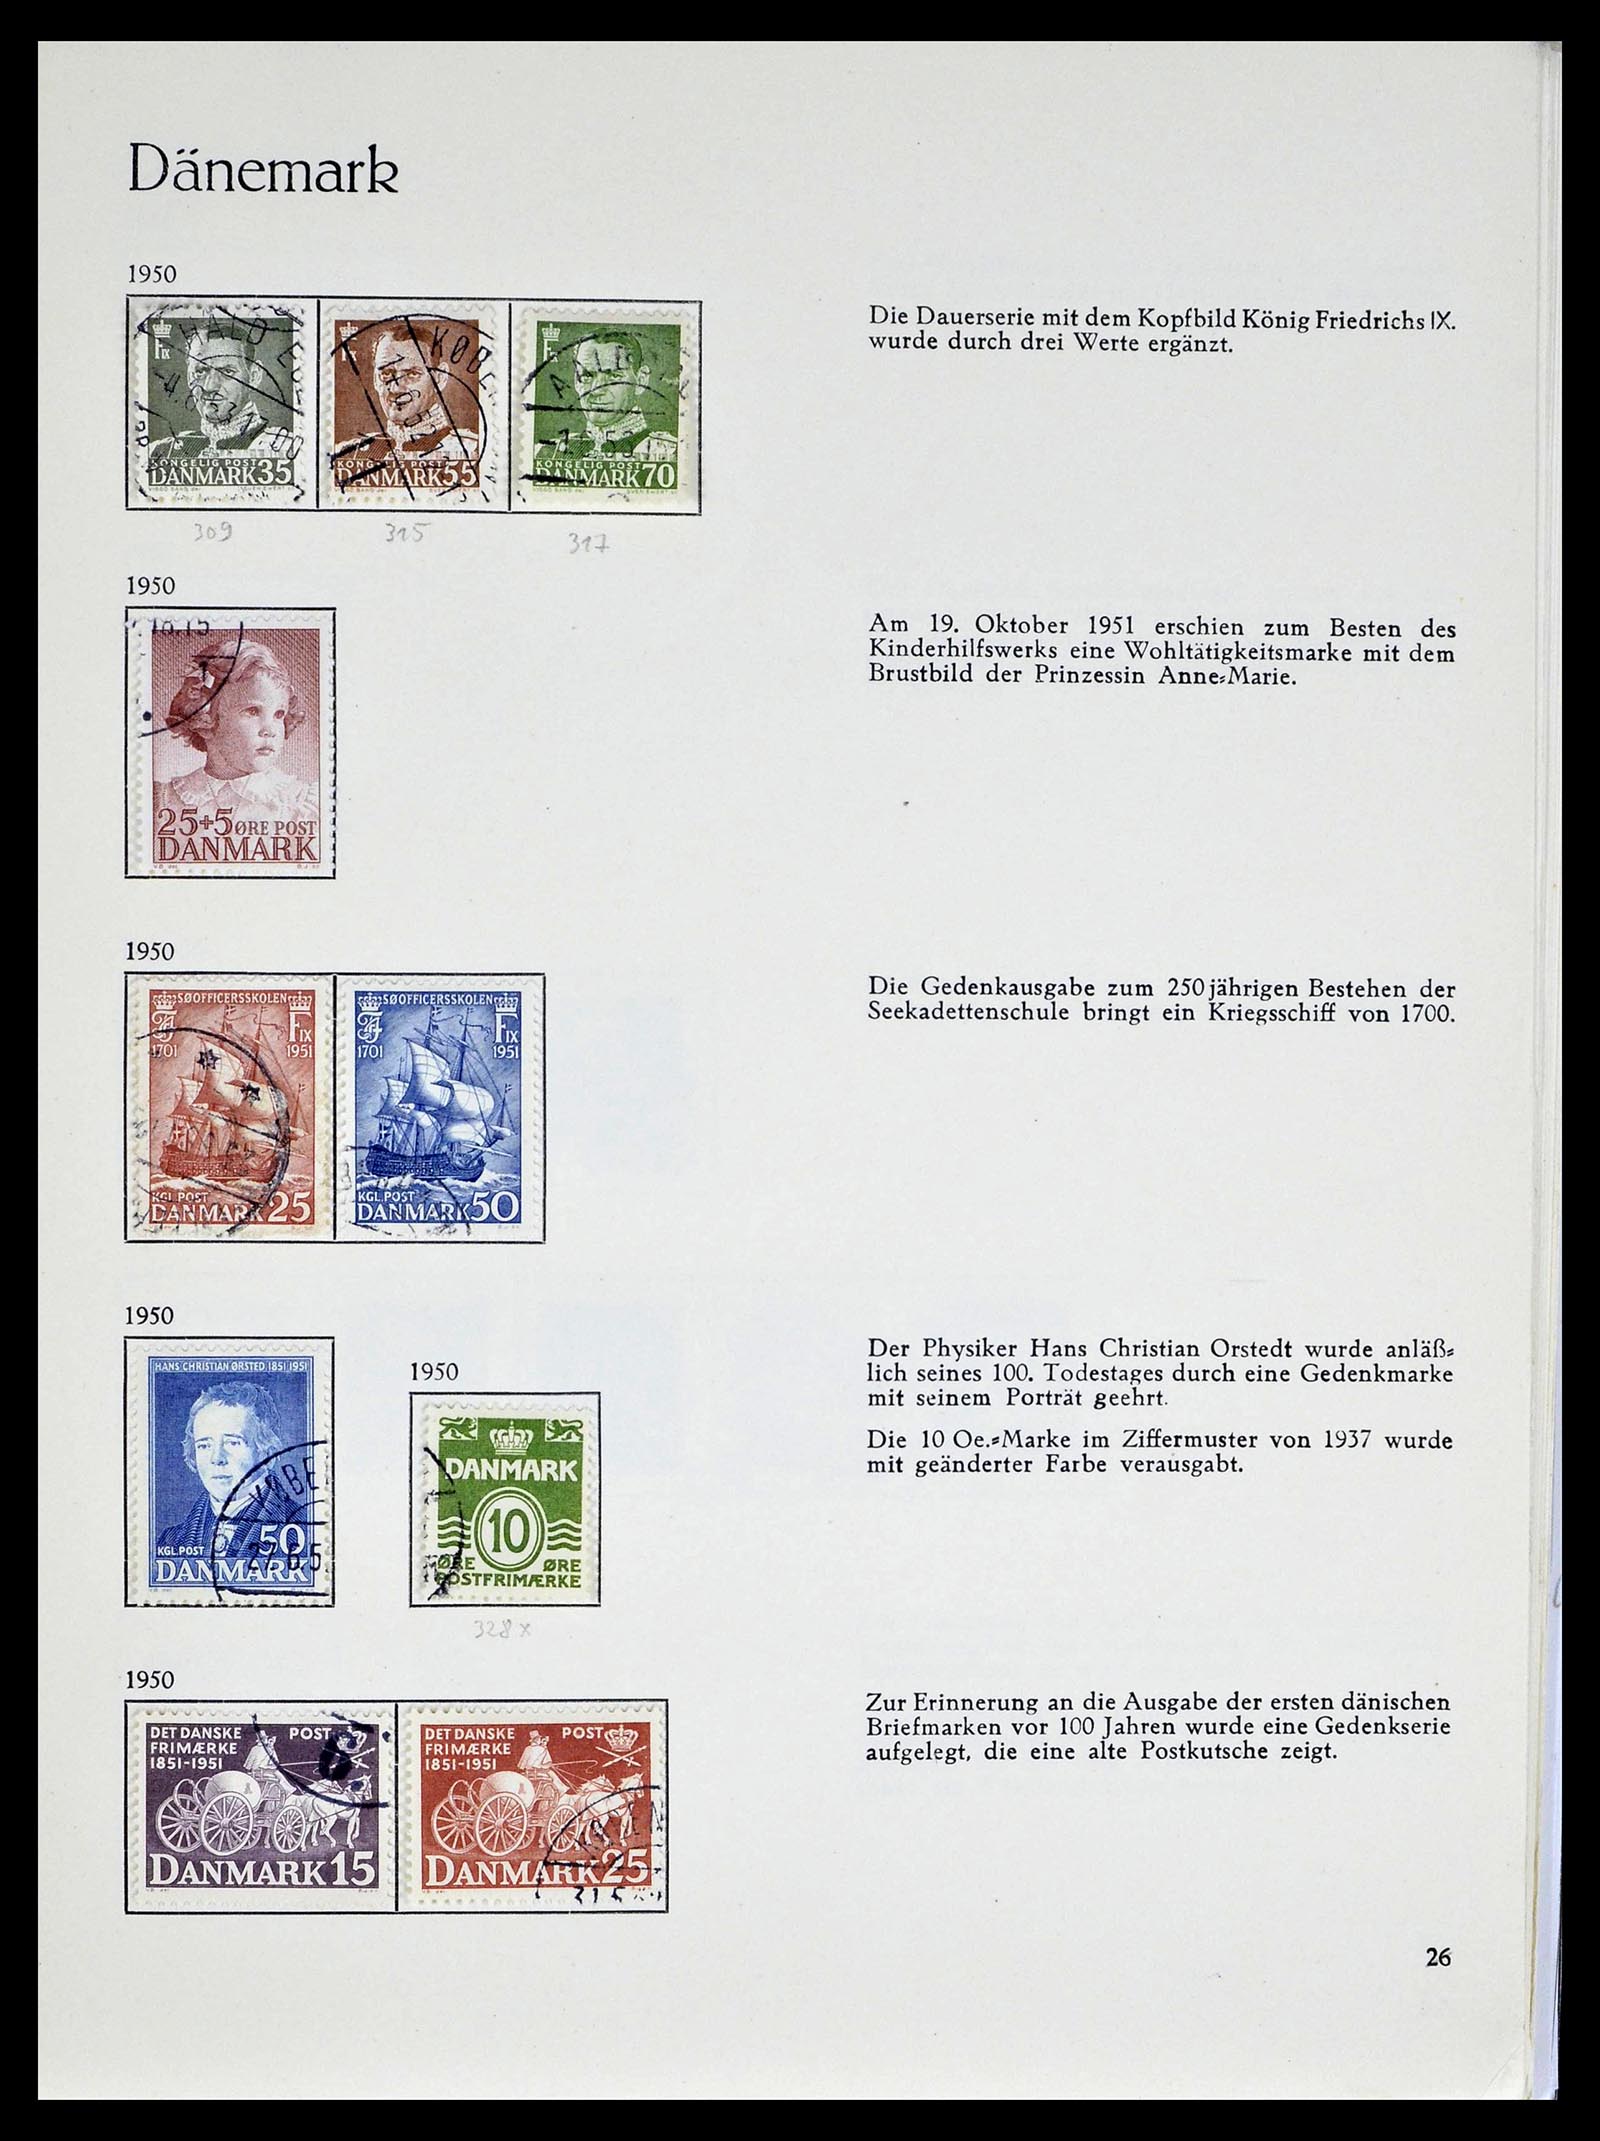 39407 0020 - Stamp collection 39407 Denmark 1851-1969.